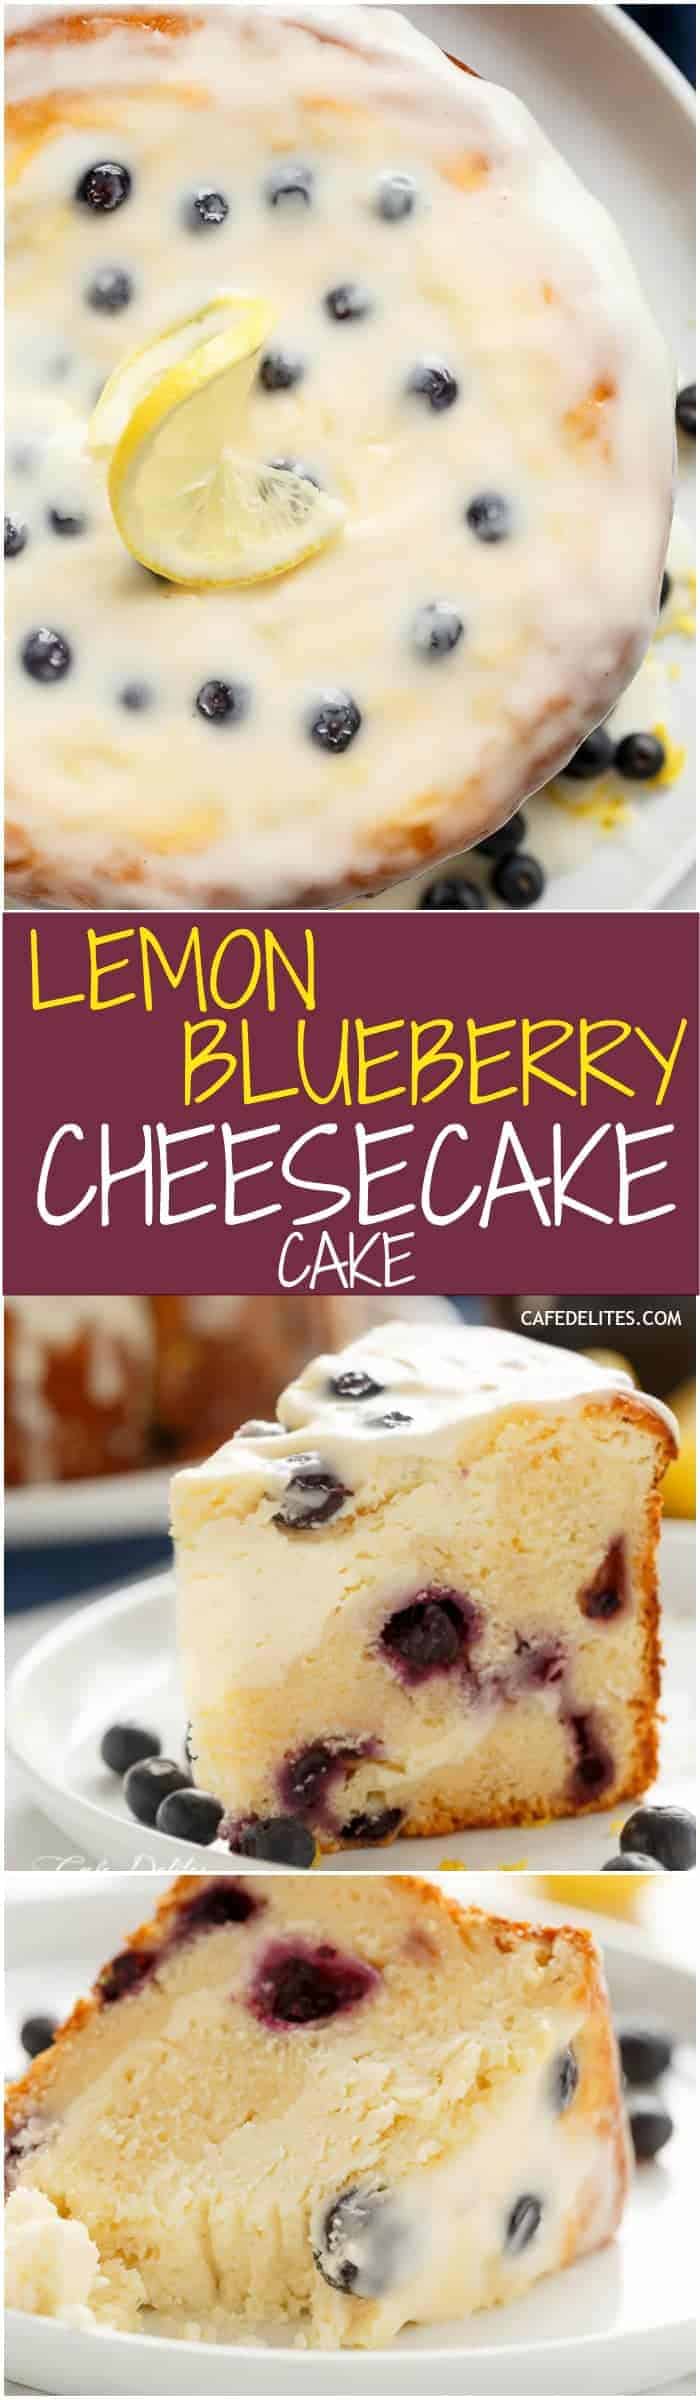 Blueberry Lemon Cheesecake Cake with a Lemon Cream Cheese Glaze to kick start your season! Baked in the one pan Easy to make with no layering! | https://cafedelites.com